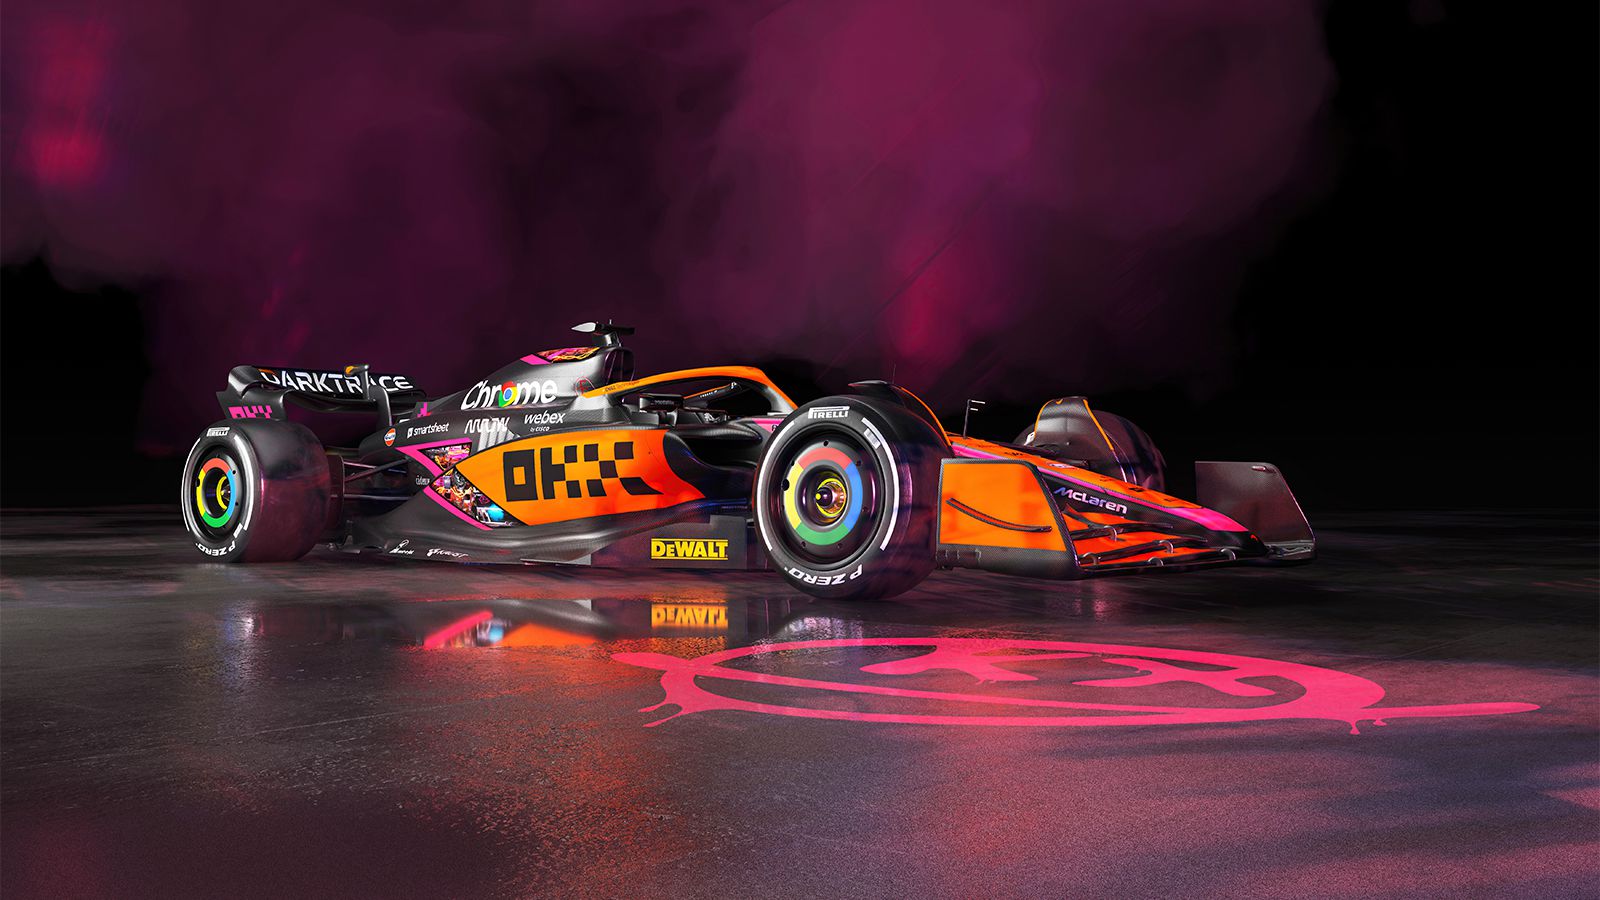 McLaren special livery for Singapore and Japan Grands Prix